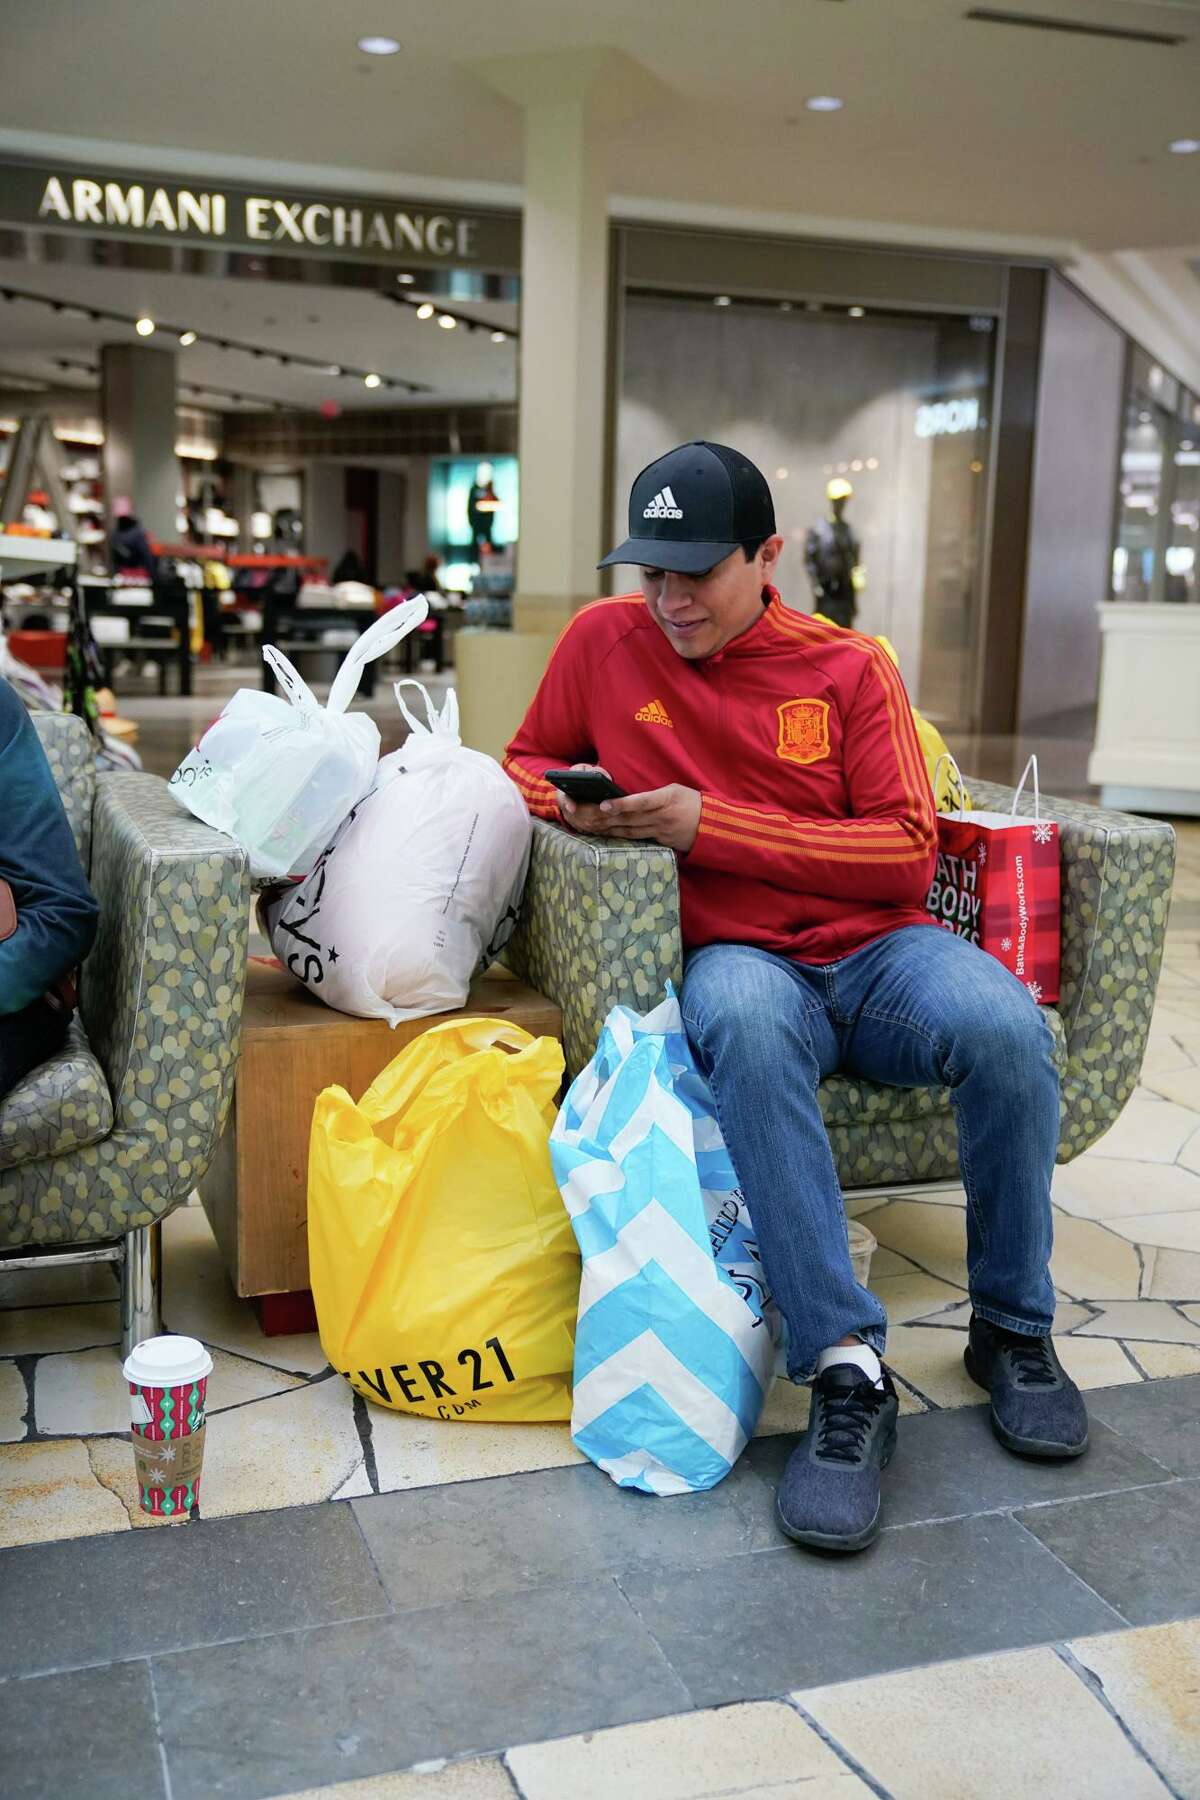 Brick-and-mortar retail far from dead, investors, owners say